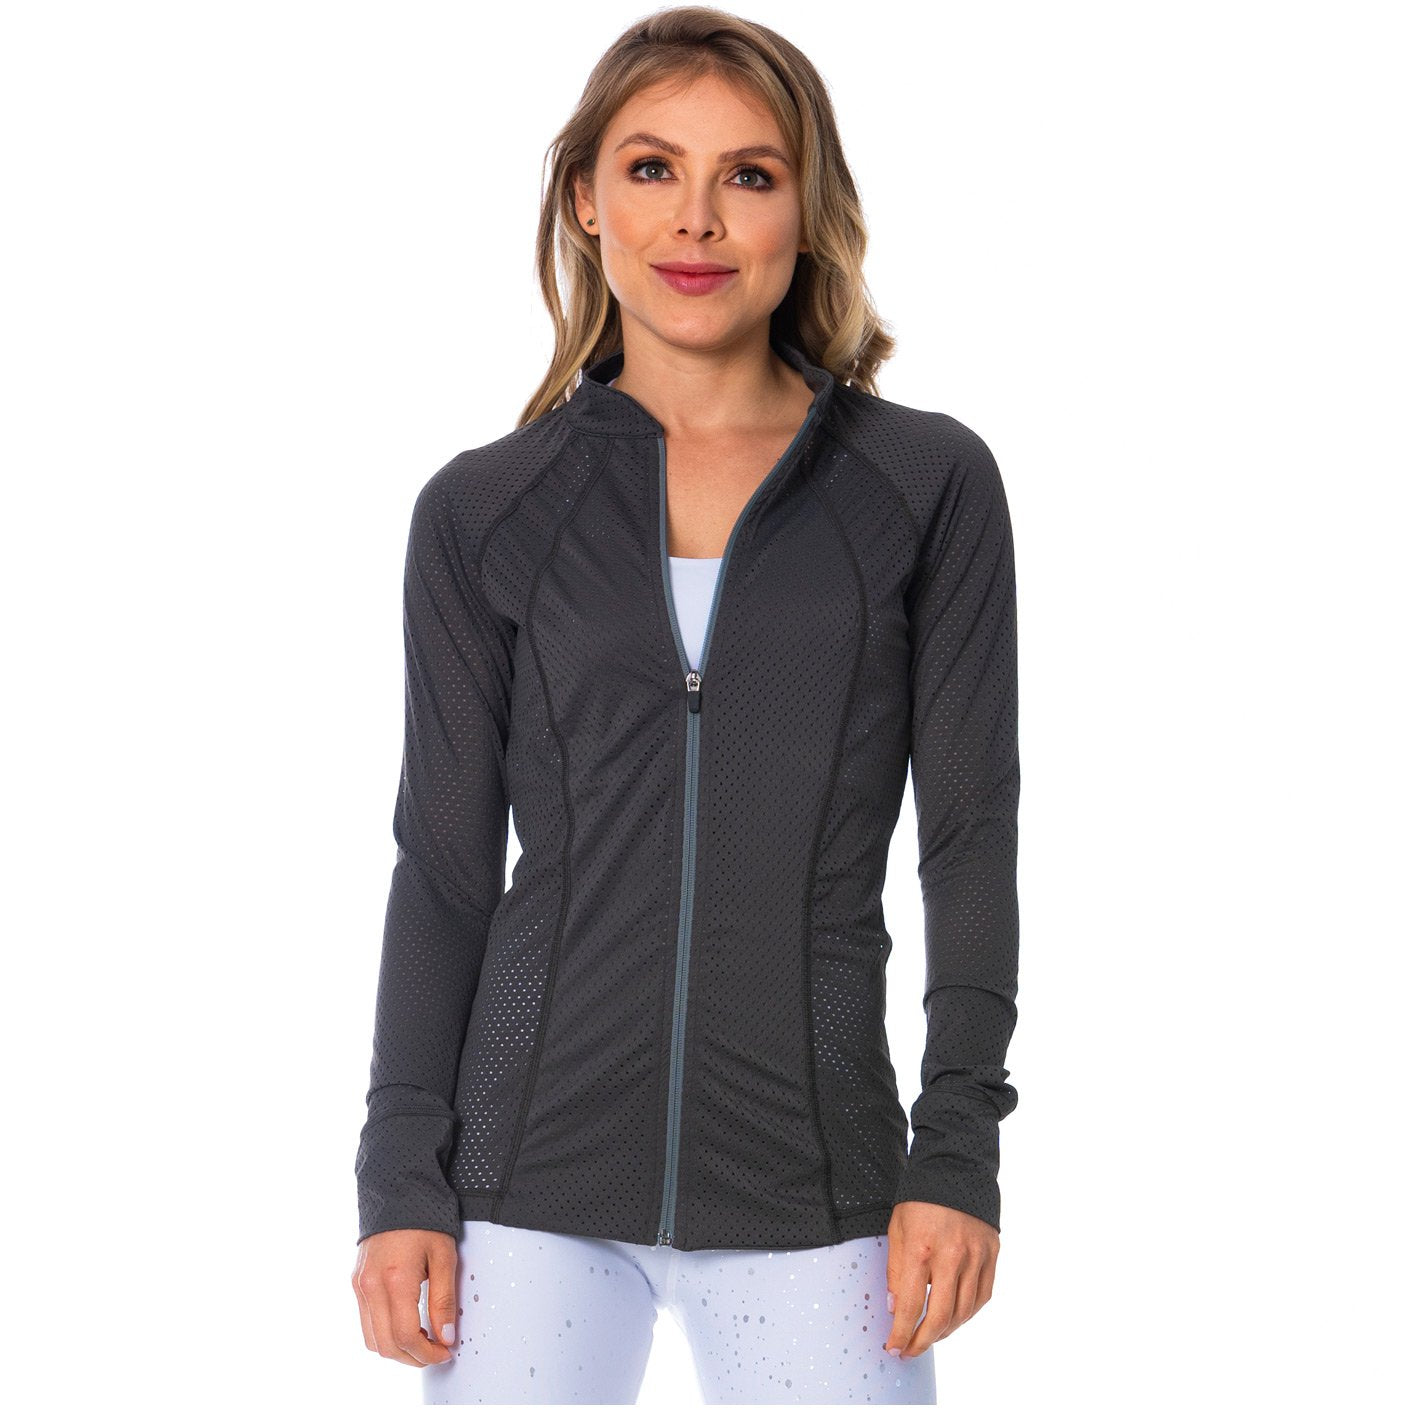 FLEXMEE Activewear: 980010 - See-Through Sports Jacket for Women